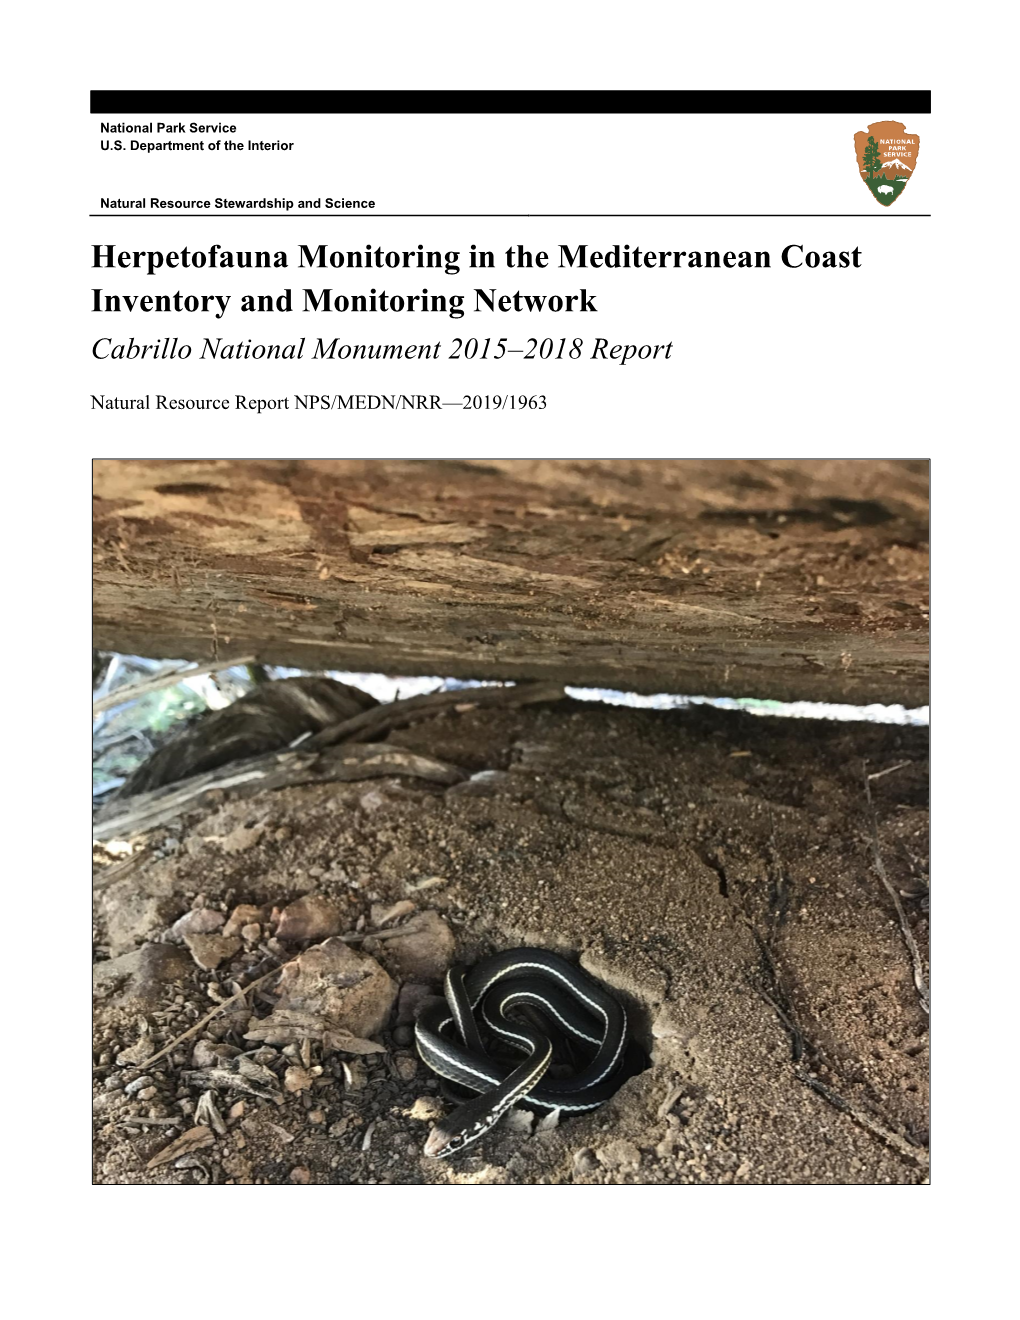 Herpetofauna Monitoring in the Mediterranean Coast Inventory and Monitoring Network: Cabrillo National Monument 2015–2018 Report